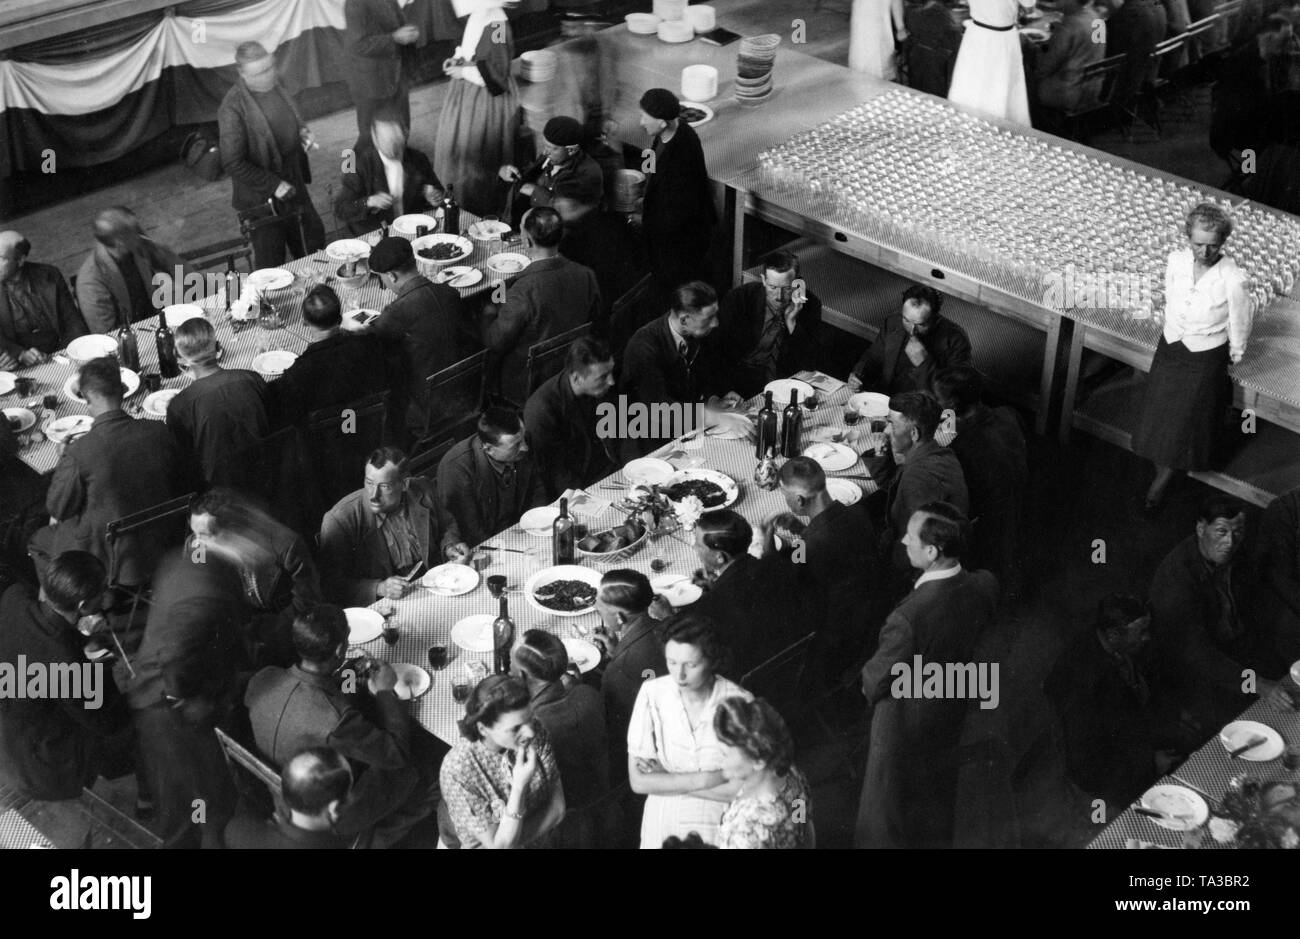 In Chalon-sur-Saone on the Franco-German demarcation lines, French prisoners of war receive a meal. The soldiers have been released from captivity for health reasons and are now being repatriated. Stock Photo